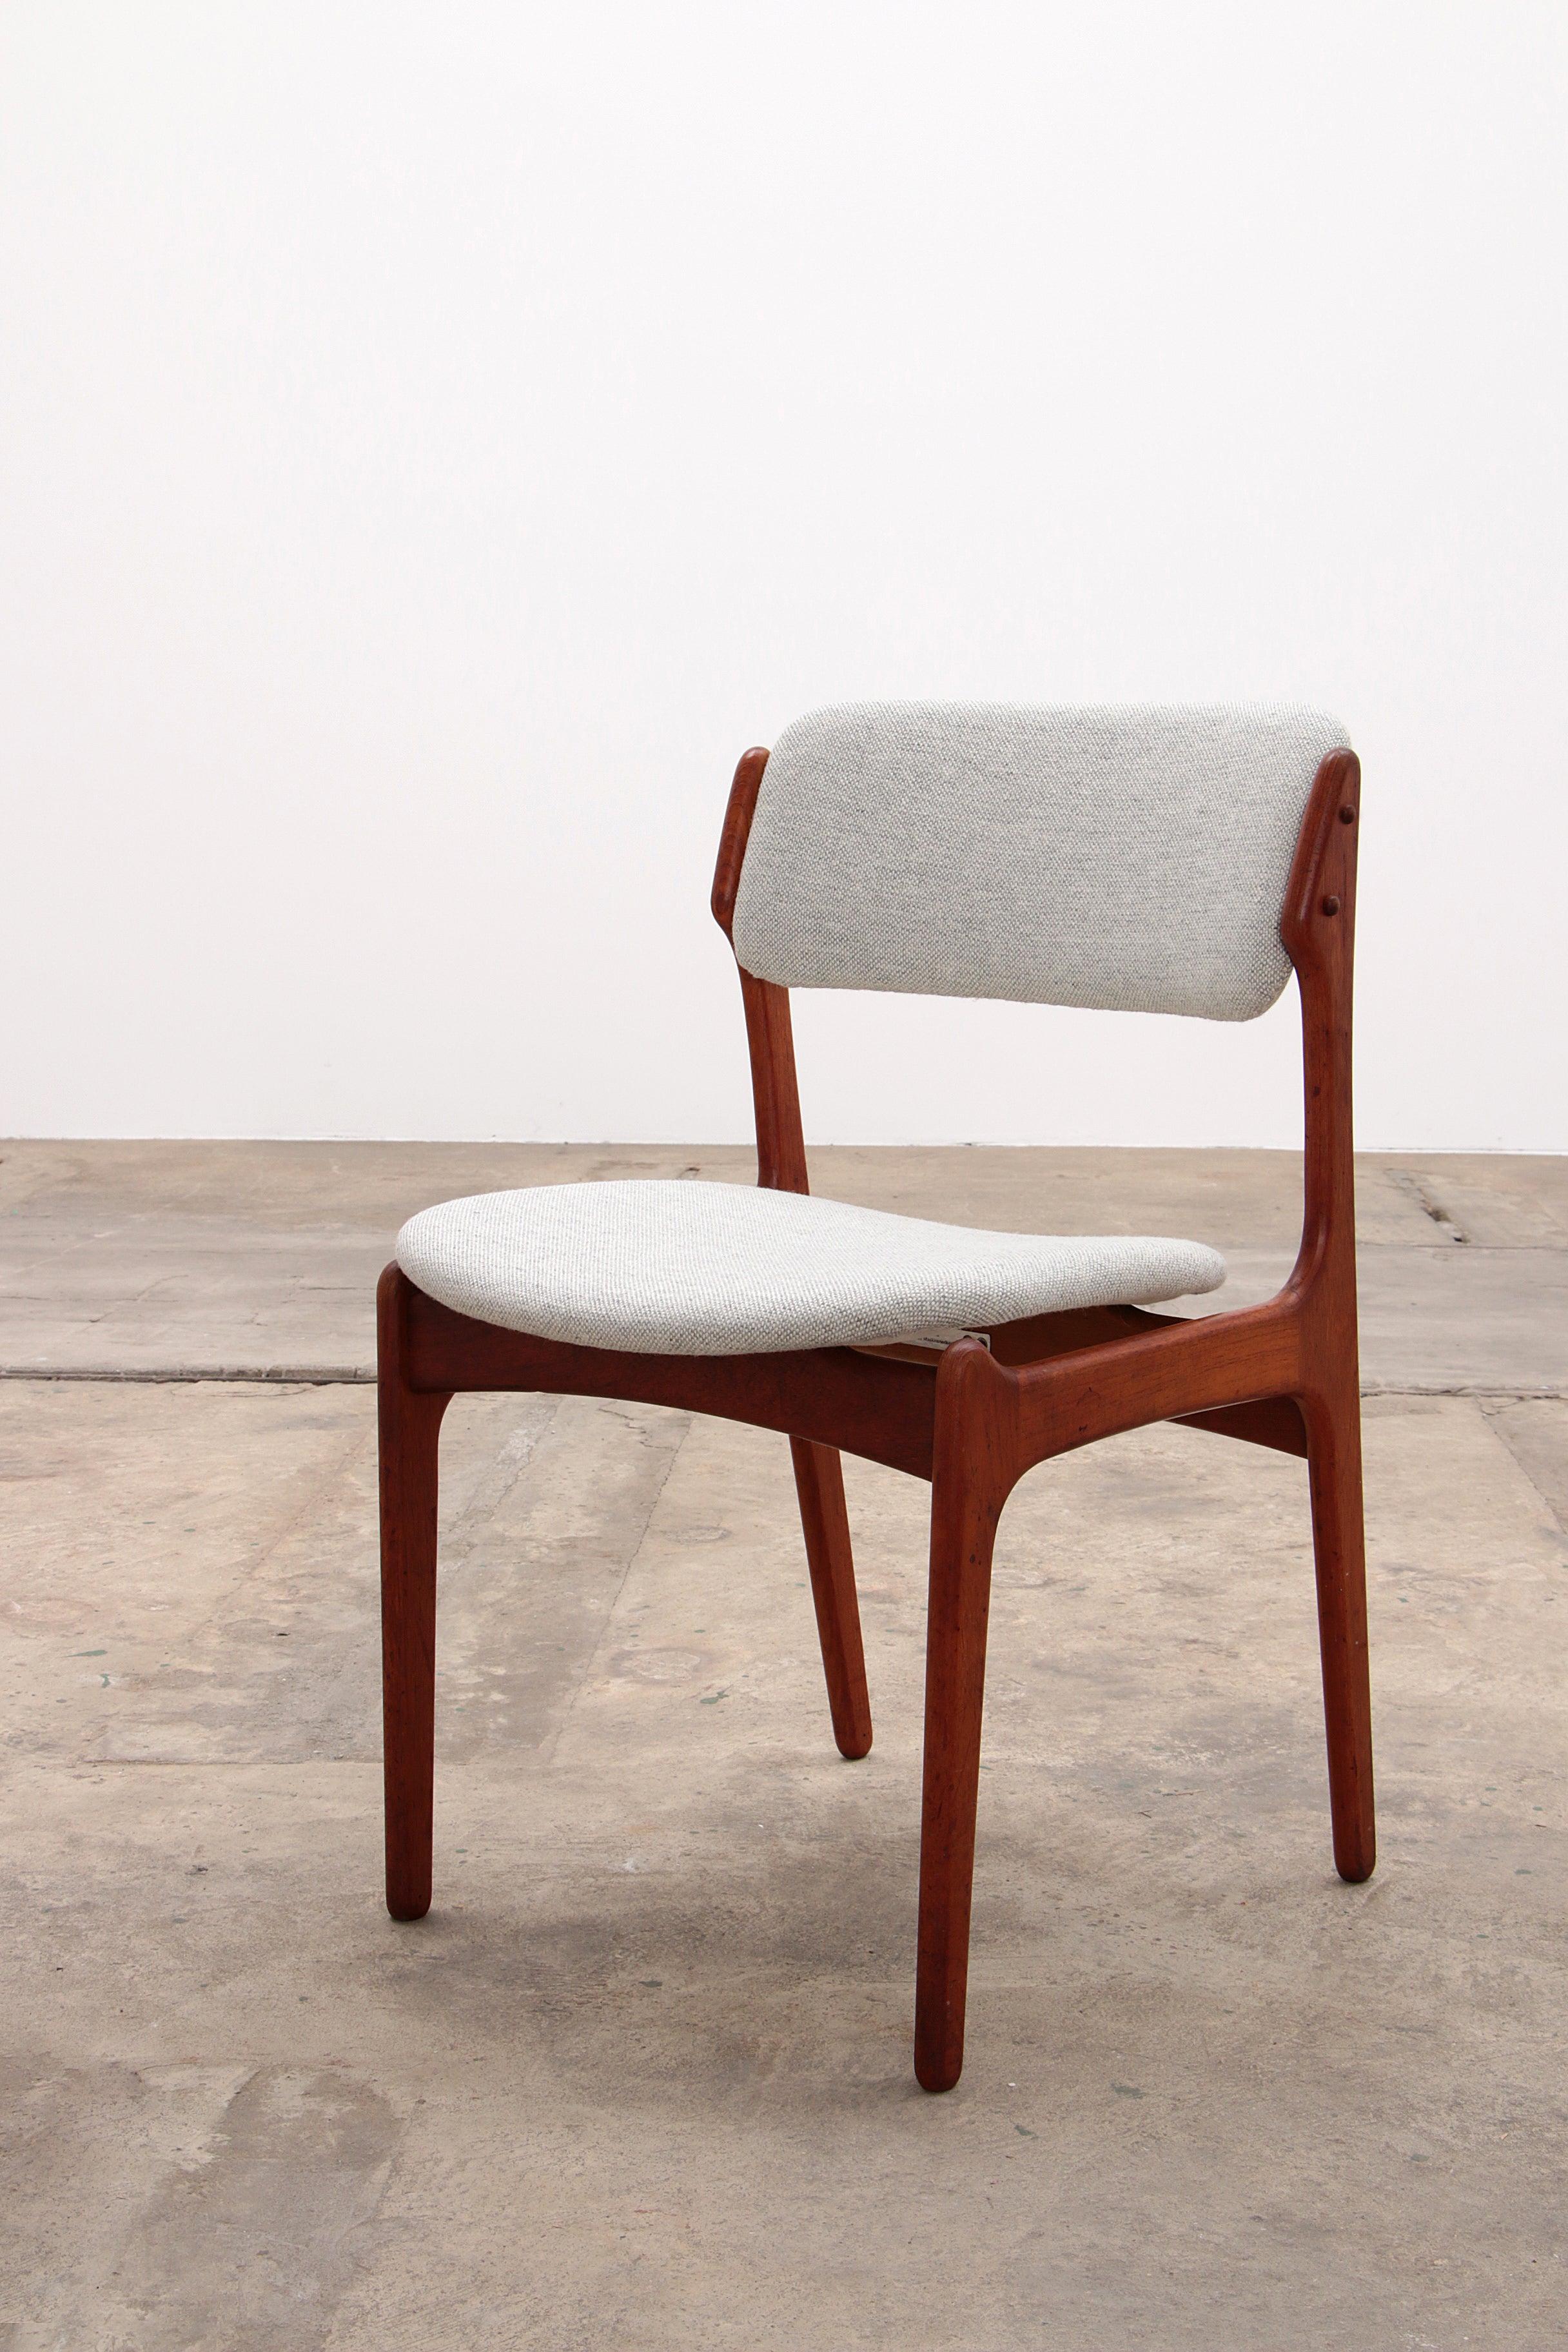 Vintage Teak Chairs Erik Buch Model 49 - Set of 2


Discover the timeless elegance of the Vintage Teak Danish Design Chairs, produced by O.D. Møbler and designed by the renowned Erik Buch in the 1960s. This set of two Model 49 chairs embodies the